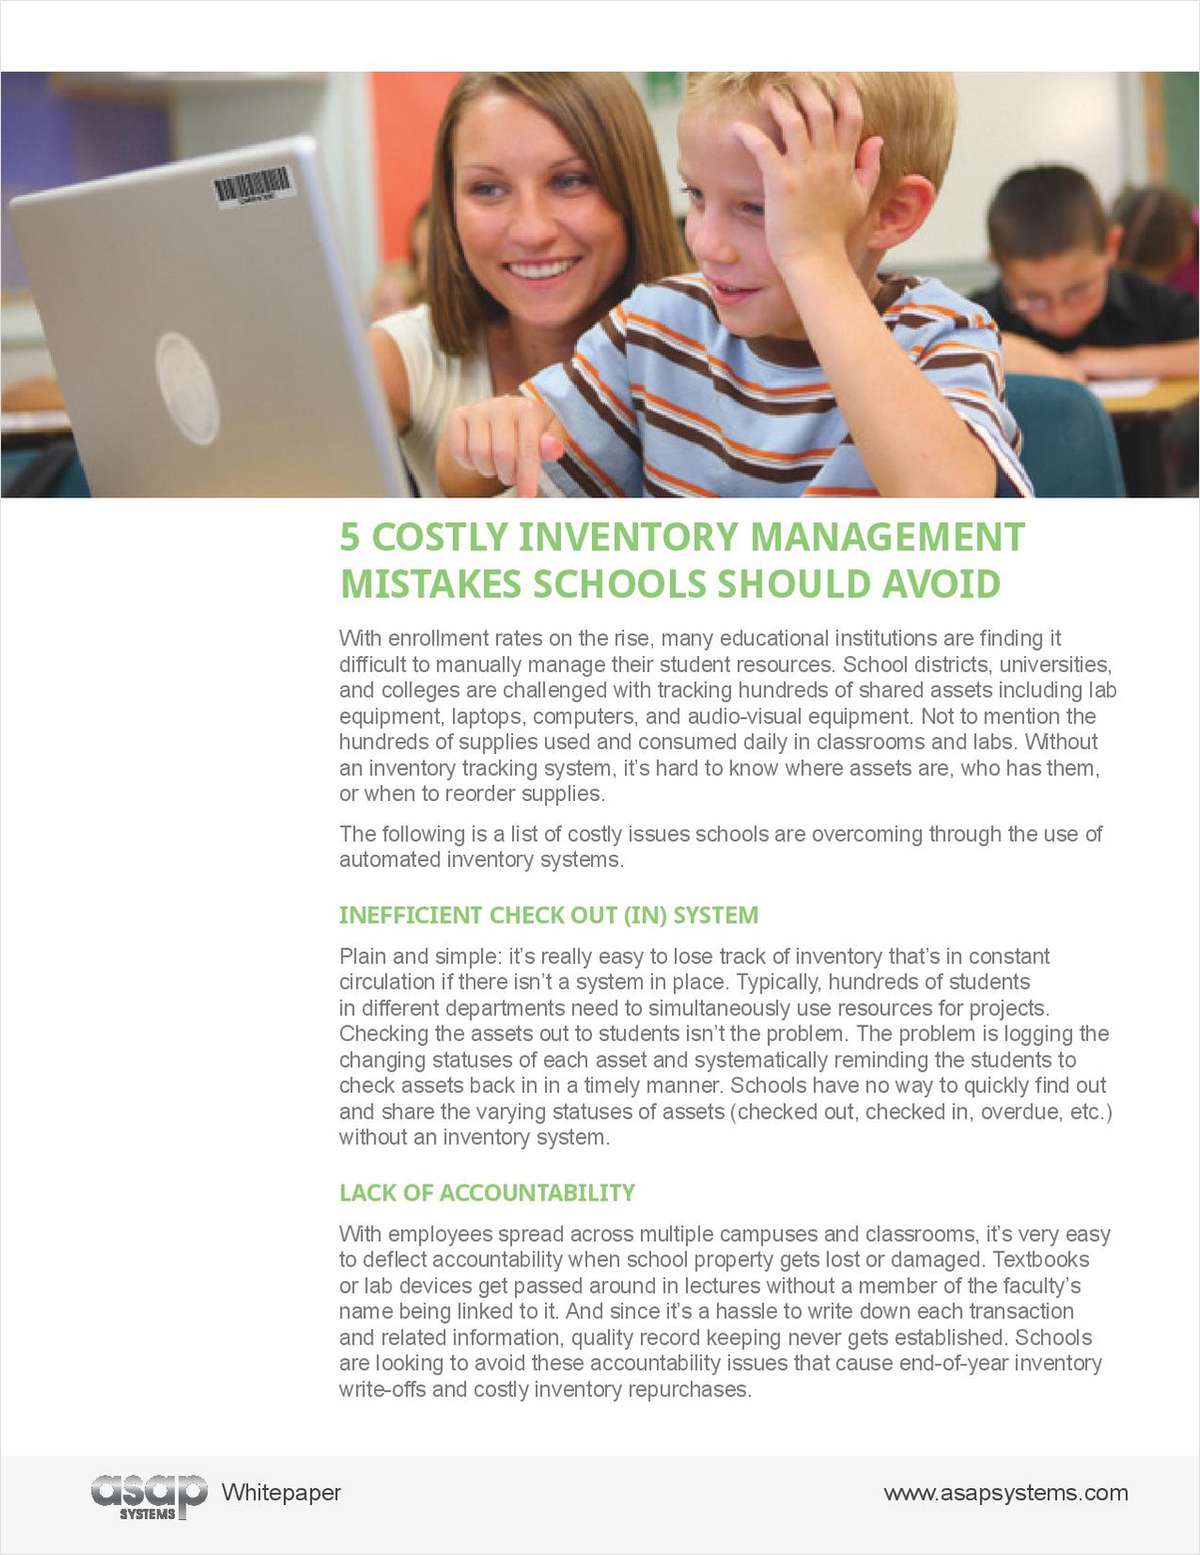 5 Costly Inventory Management Mistakes Schools Should Avoid